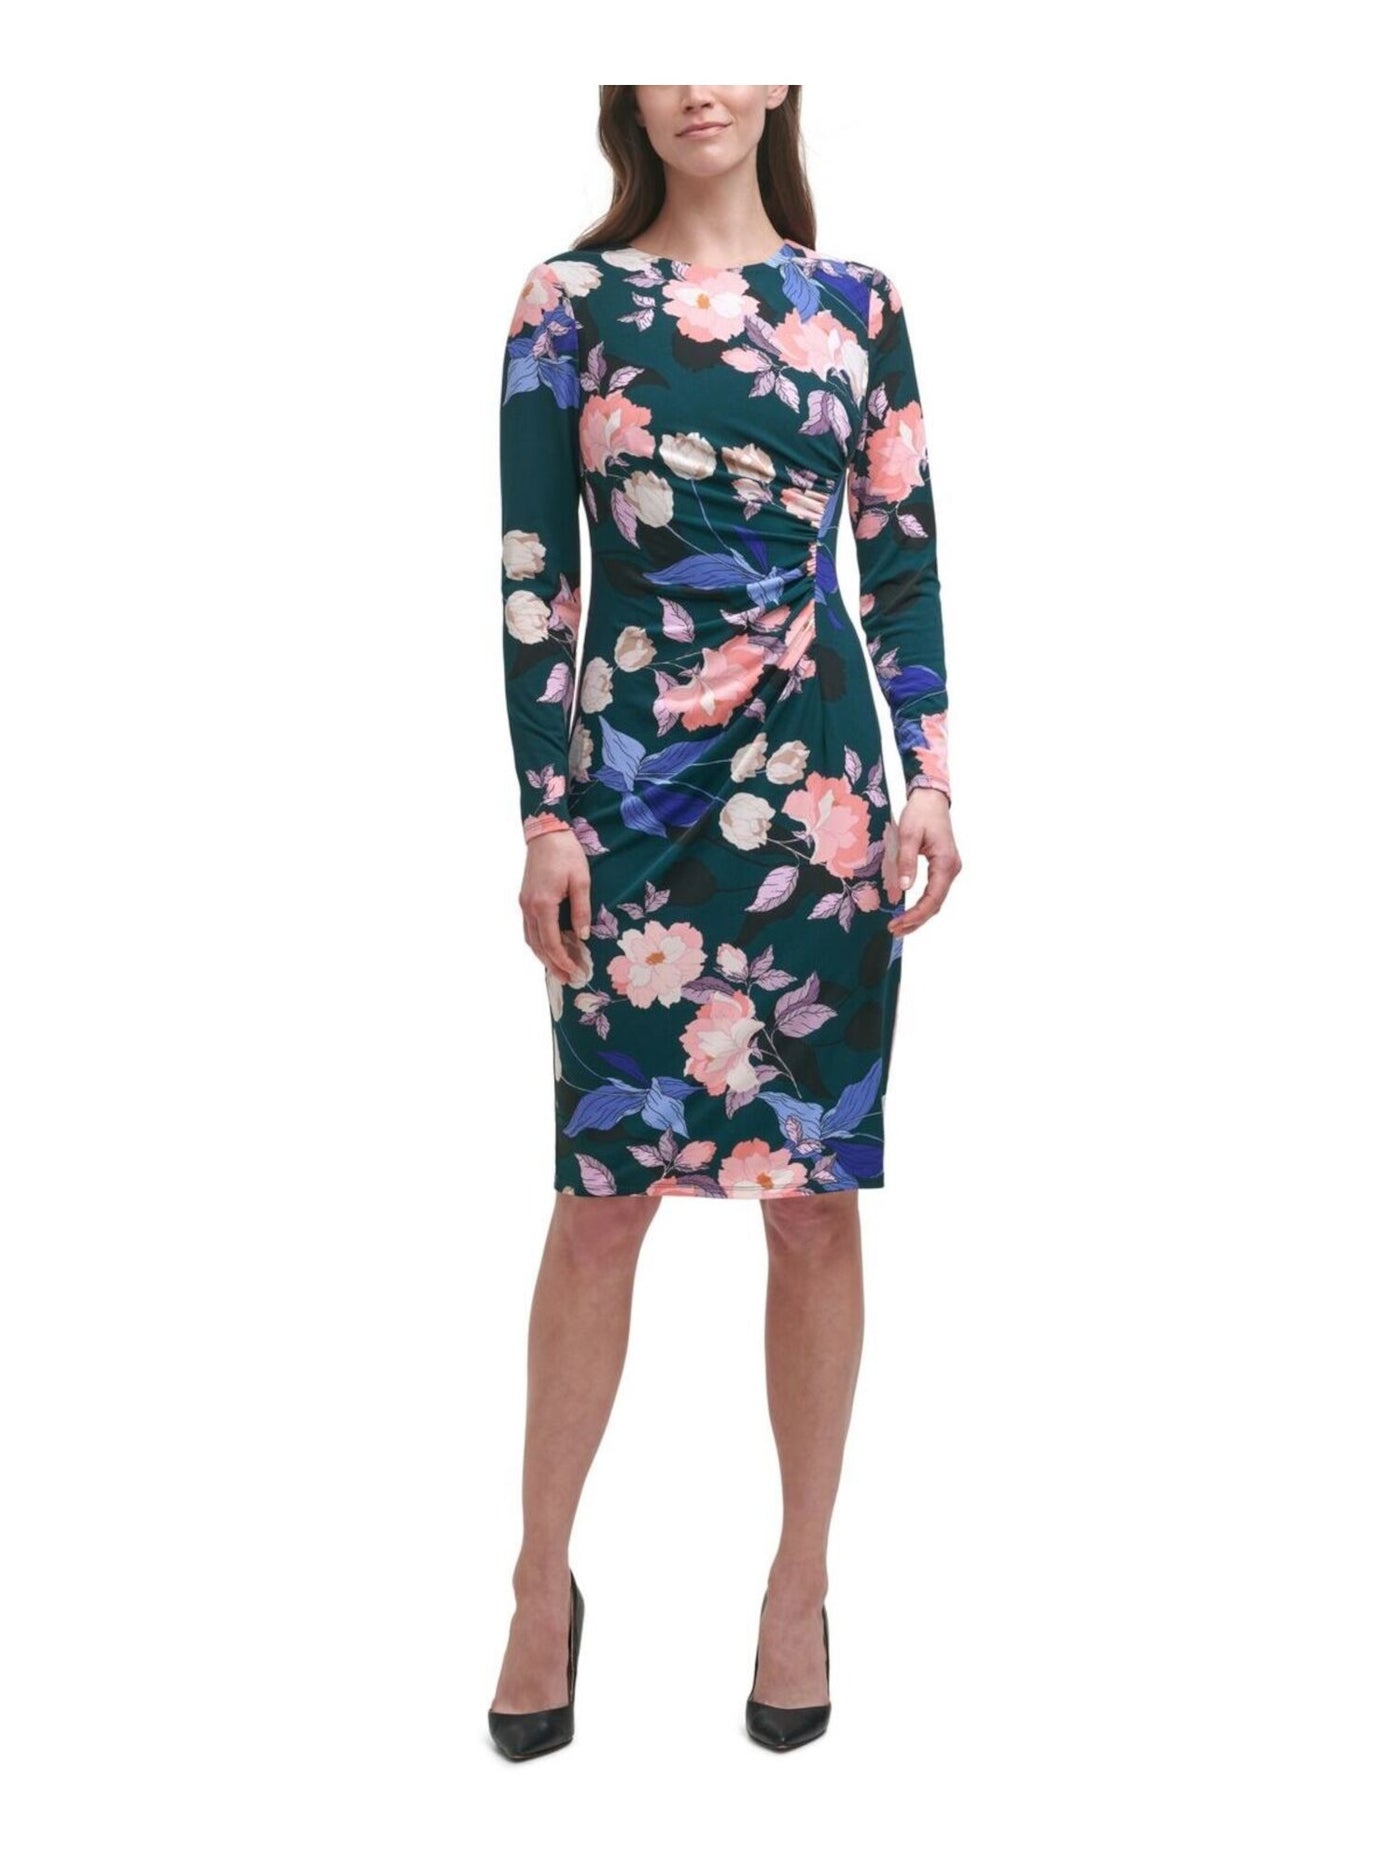 HARPER ROSE Womens Green Zippered Ruched Jersey-knit Fitted Floral Long Sleeve Round Neck Above The Knee Wear To Work Body Con Dress 8